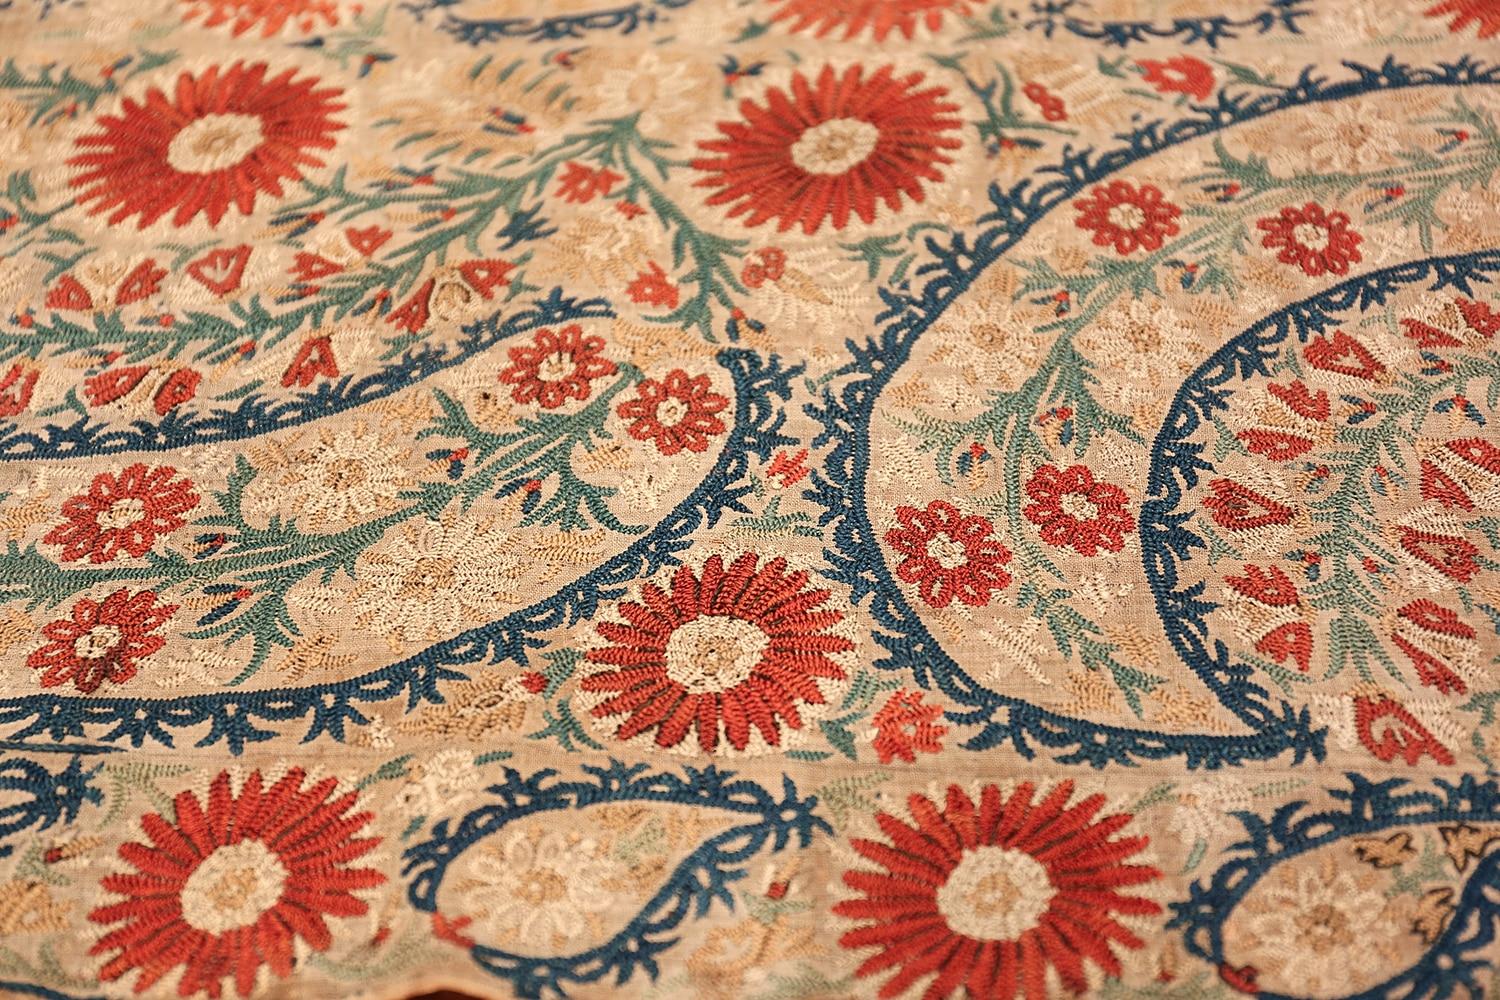 Refined Yet Rustic Antique Ottoman Textile Embroidery, Country Of Origin: Turkey, Circa Date: 17th Century